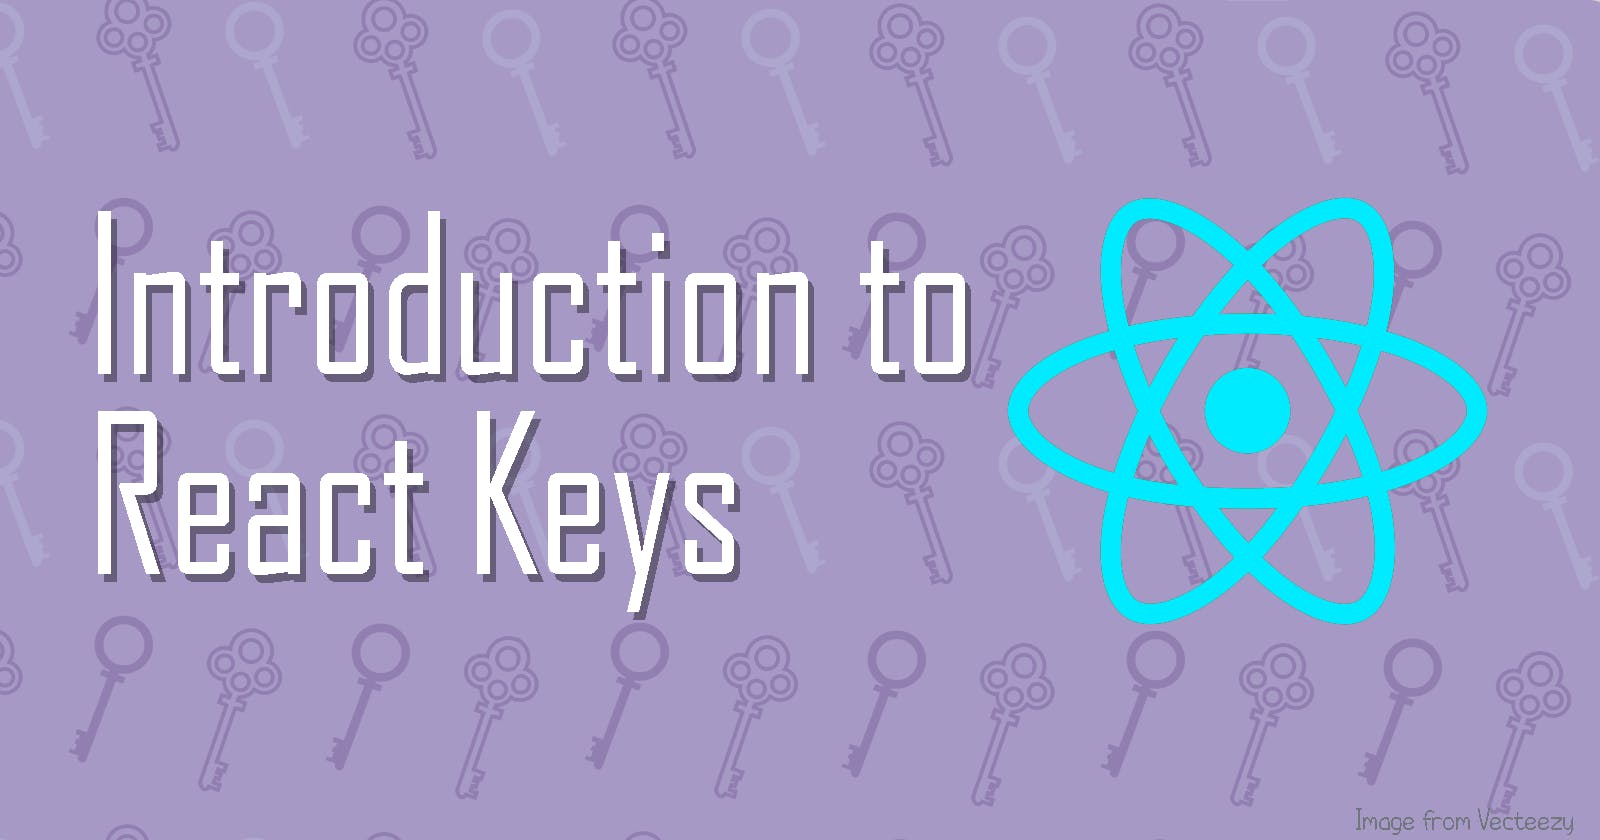 Why React need the "key" attribute?